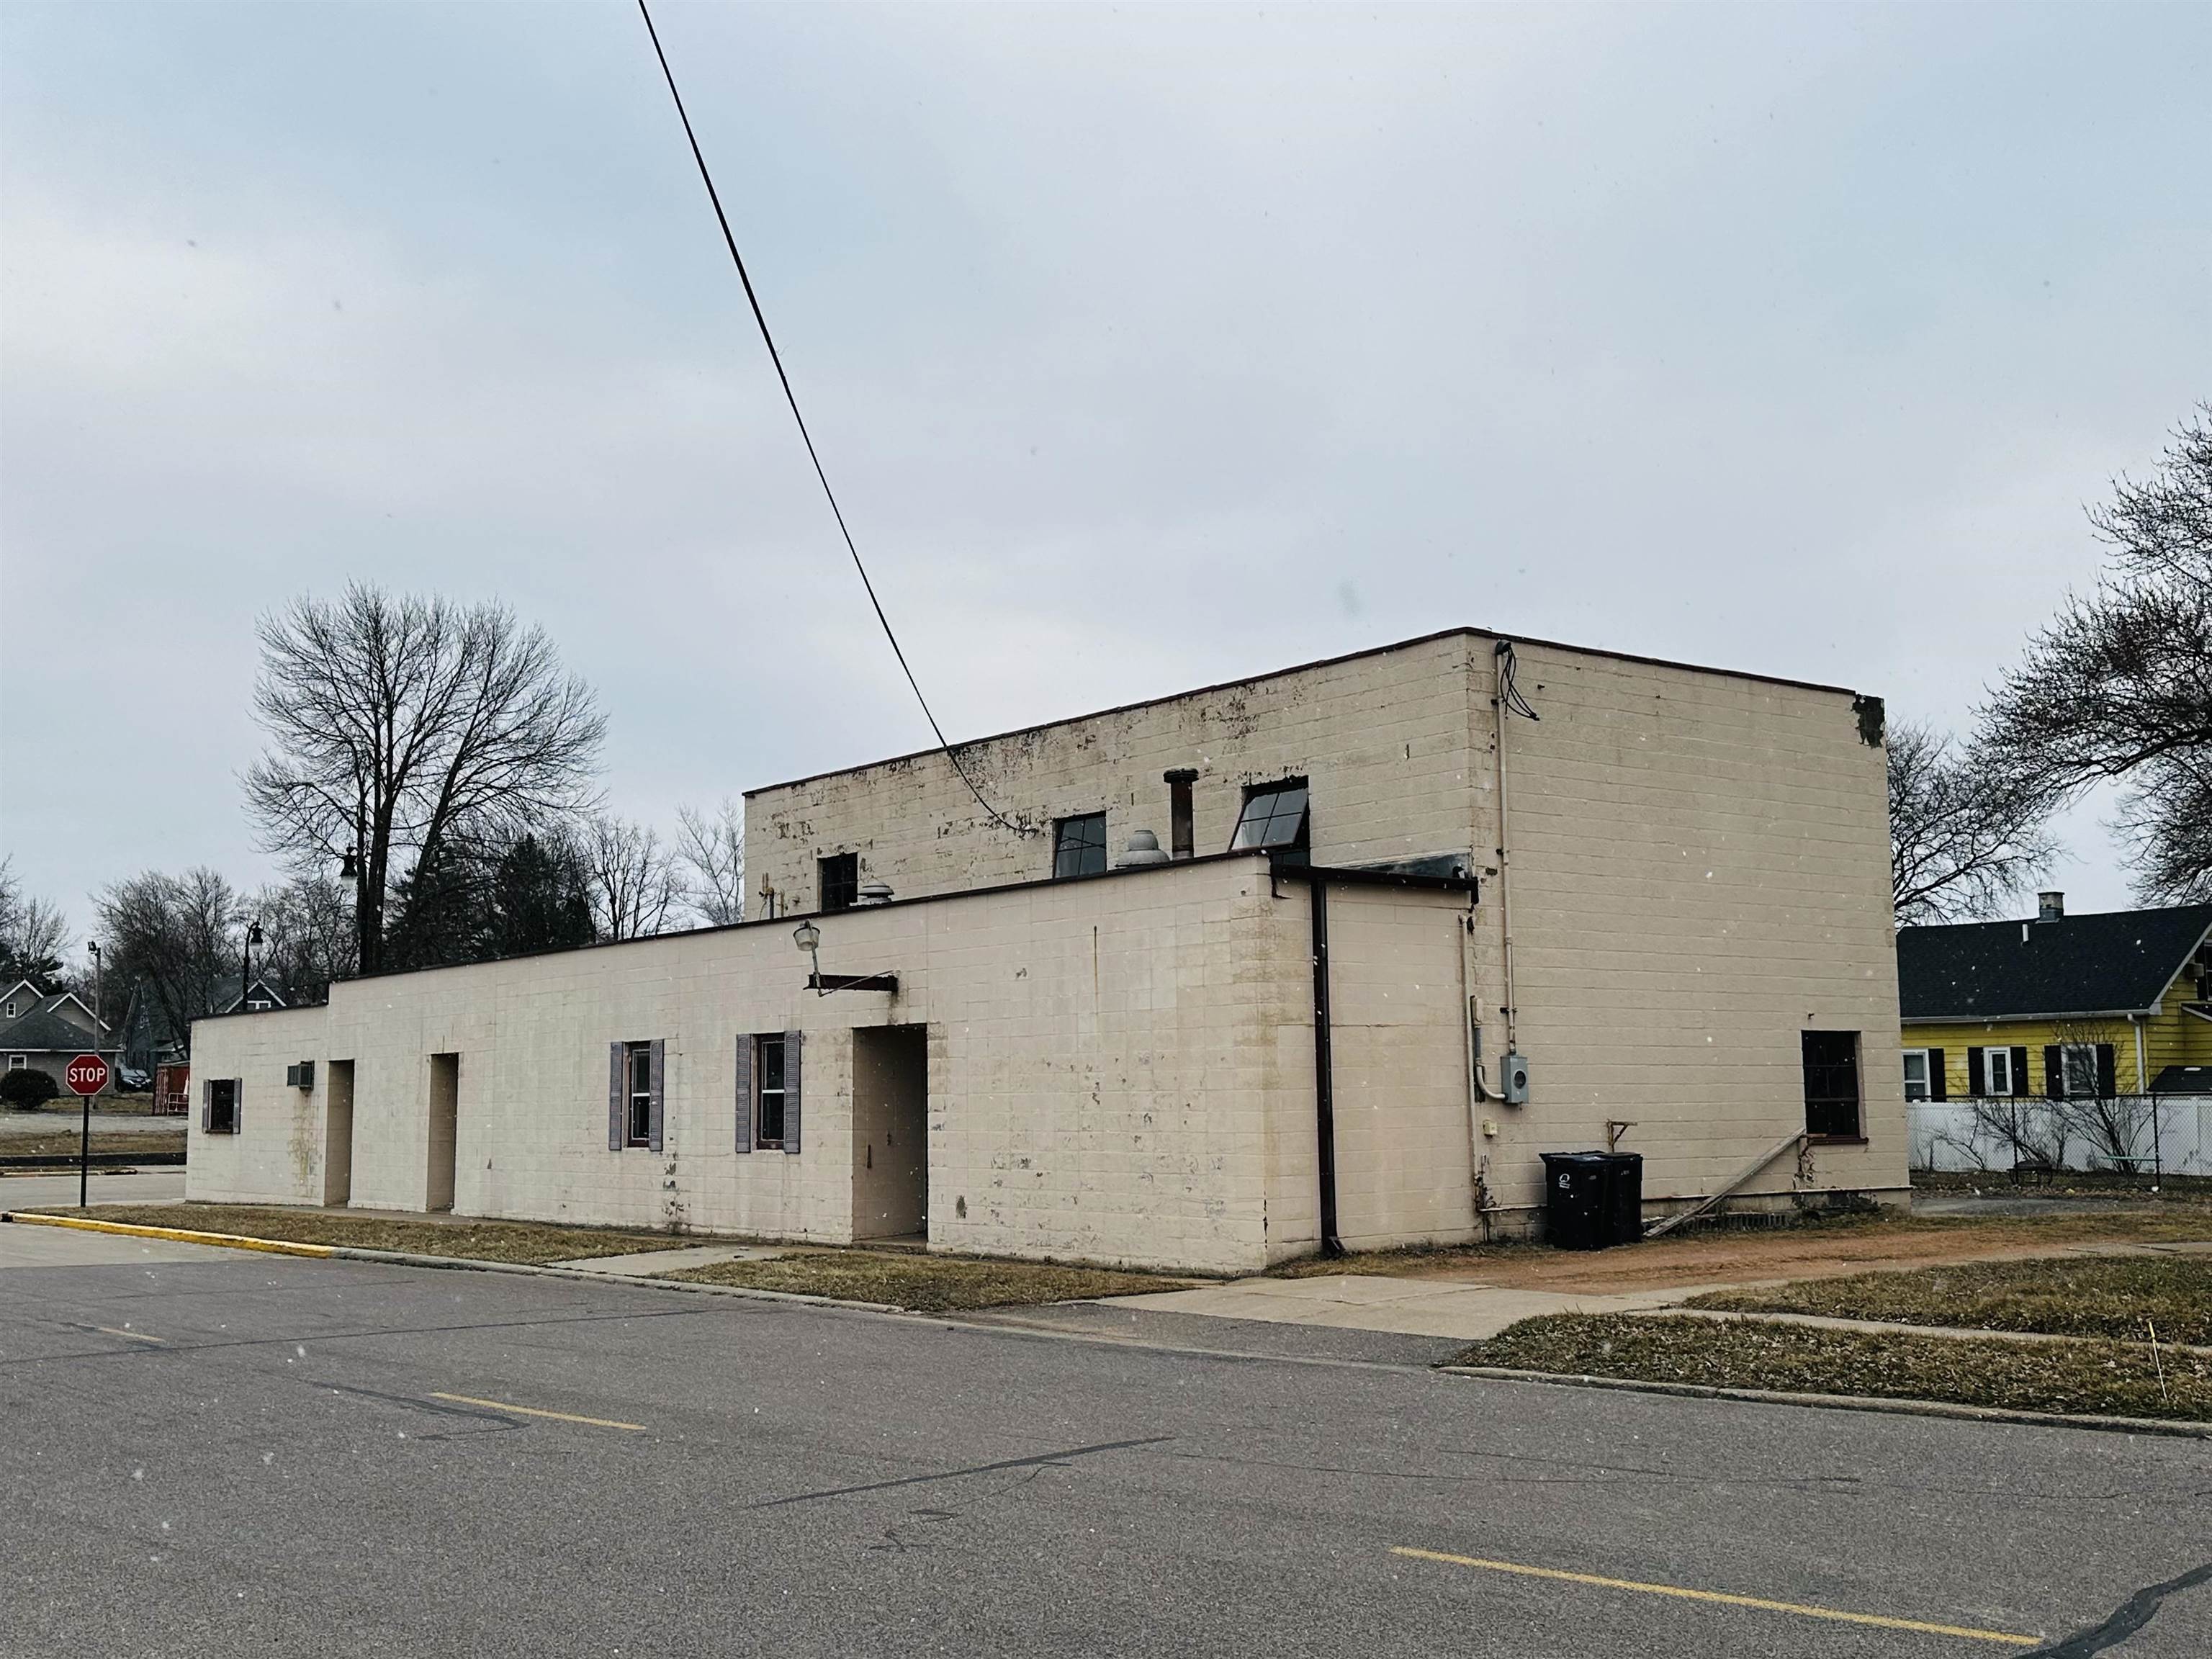 1100 S CENTRAL AVENUE, Marshfield, Wisconsin 54449, ,Commercial/industrial,For Sale,1100 S CENTRAL AVENUE,22400903